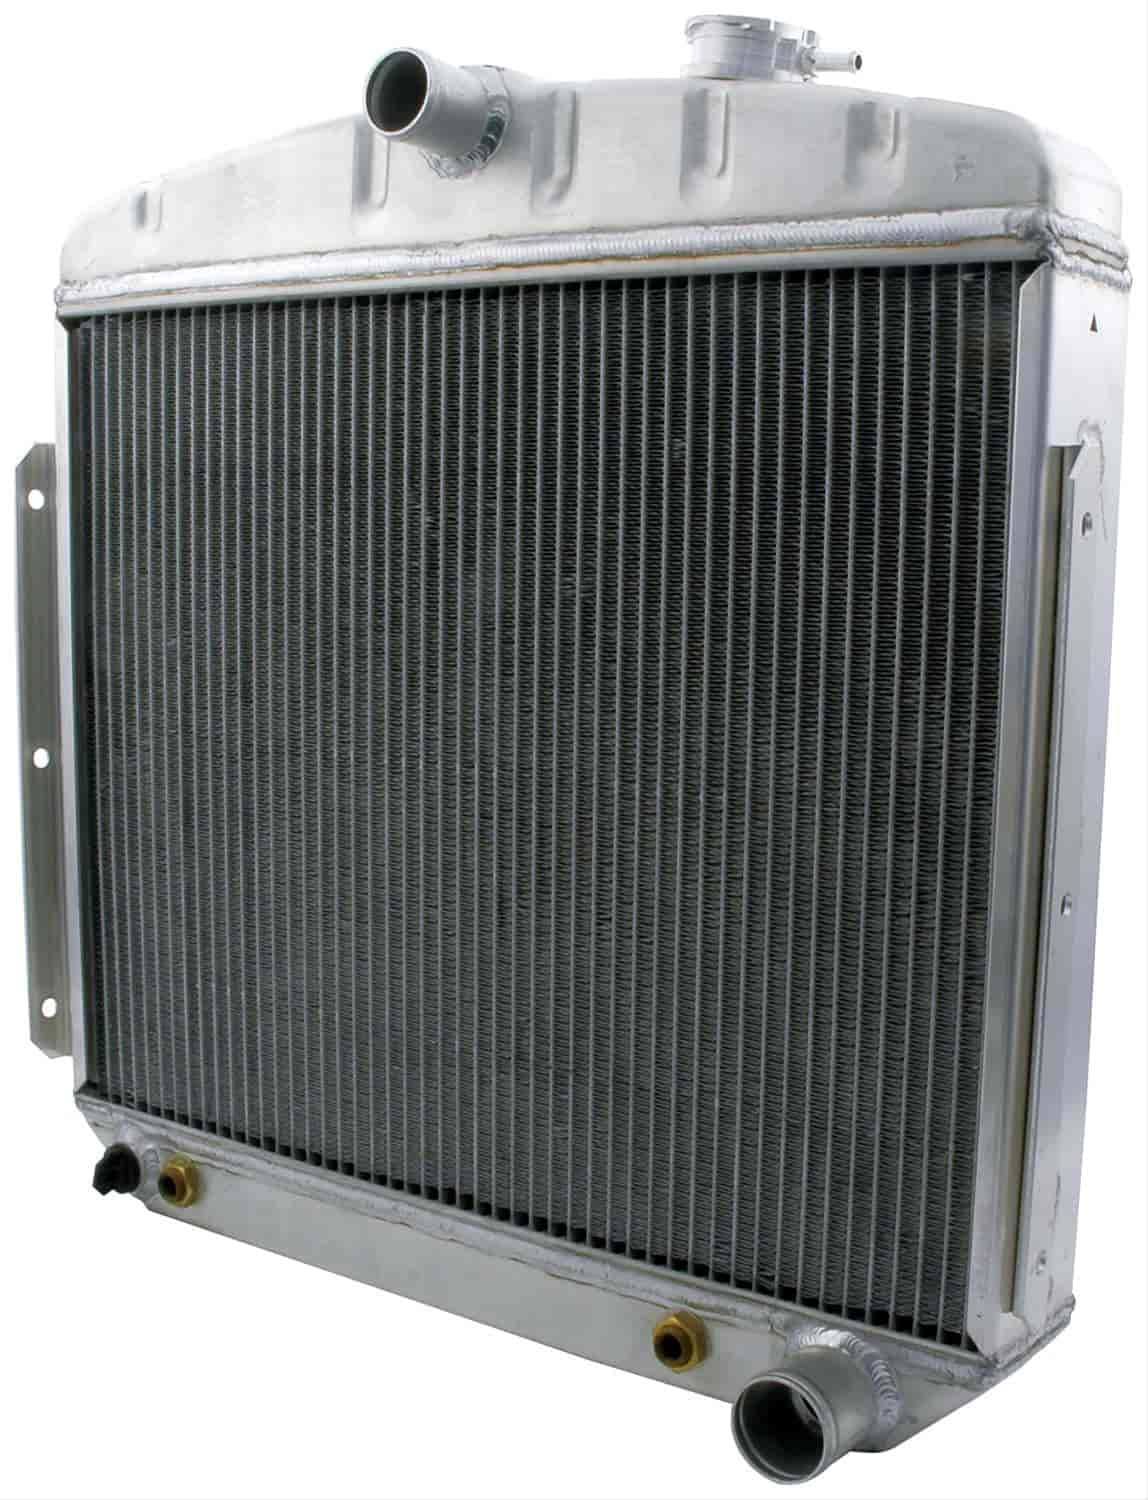 Radiator 1955-56 Chevy 6 Cyl. W/ Trans Cooler